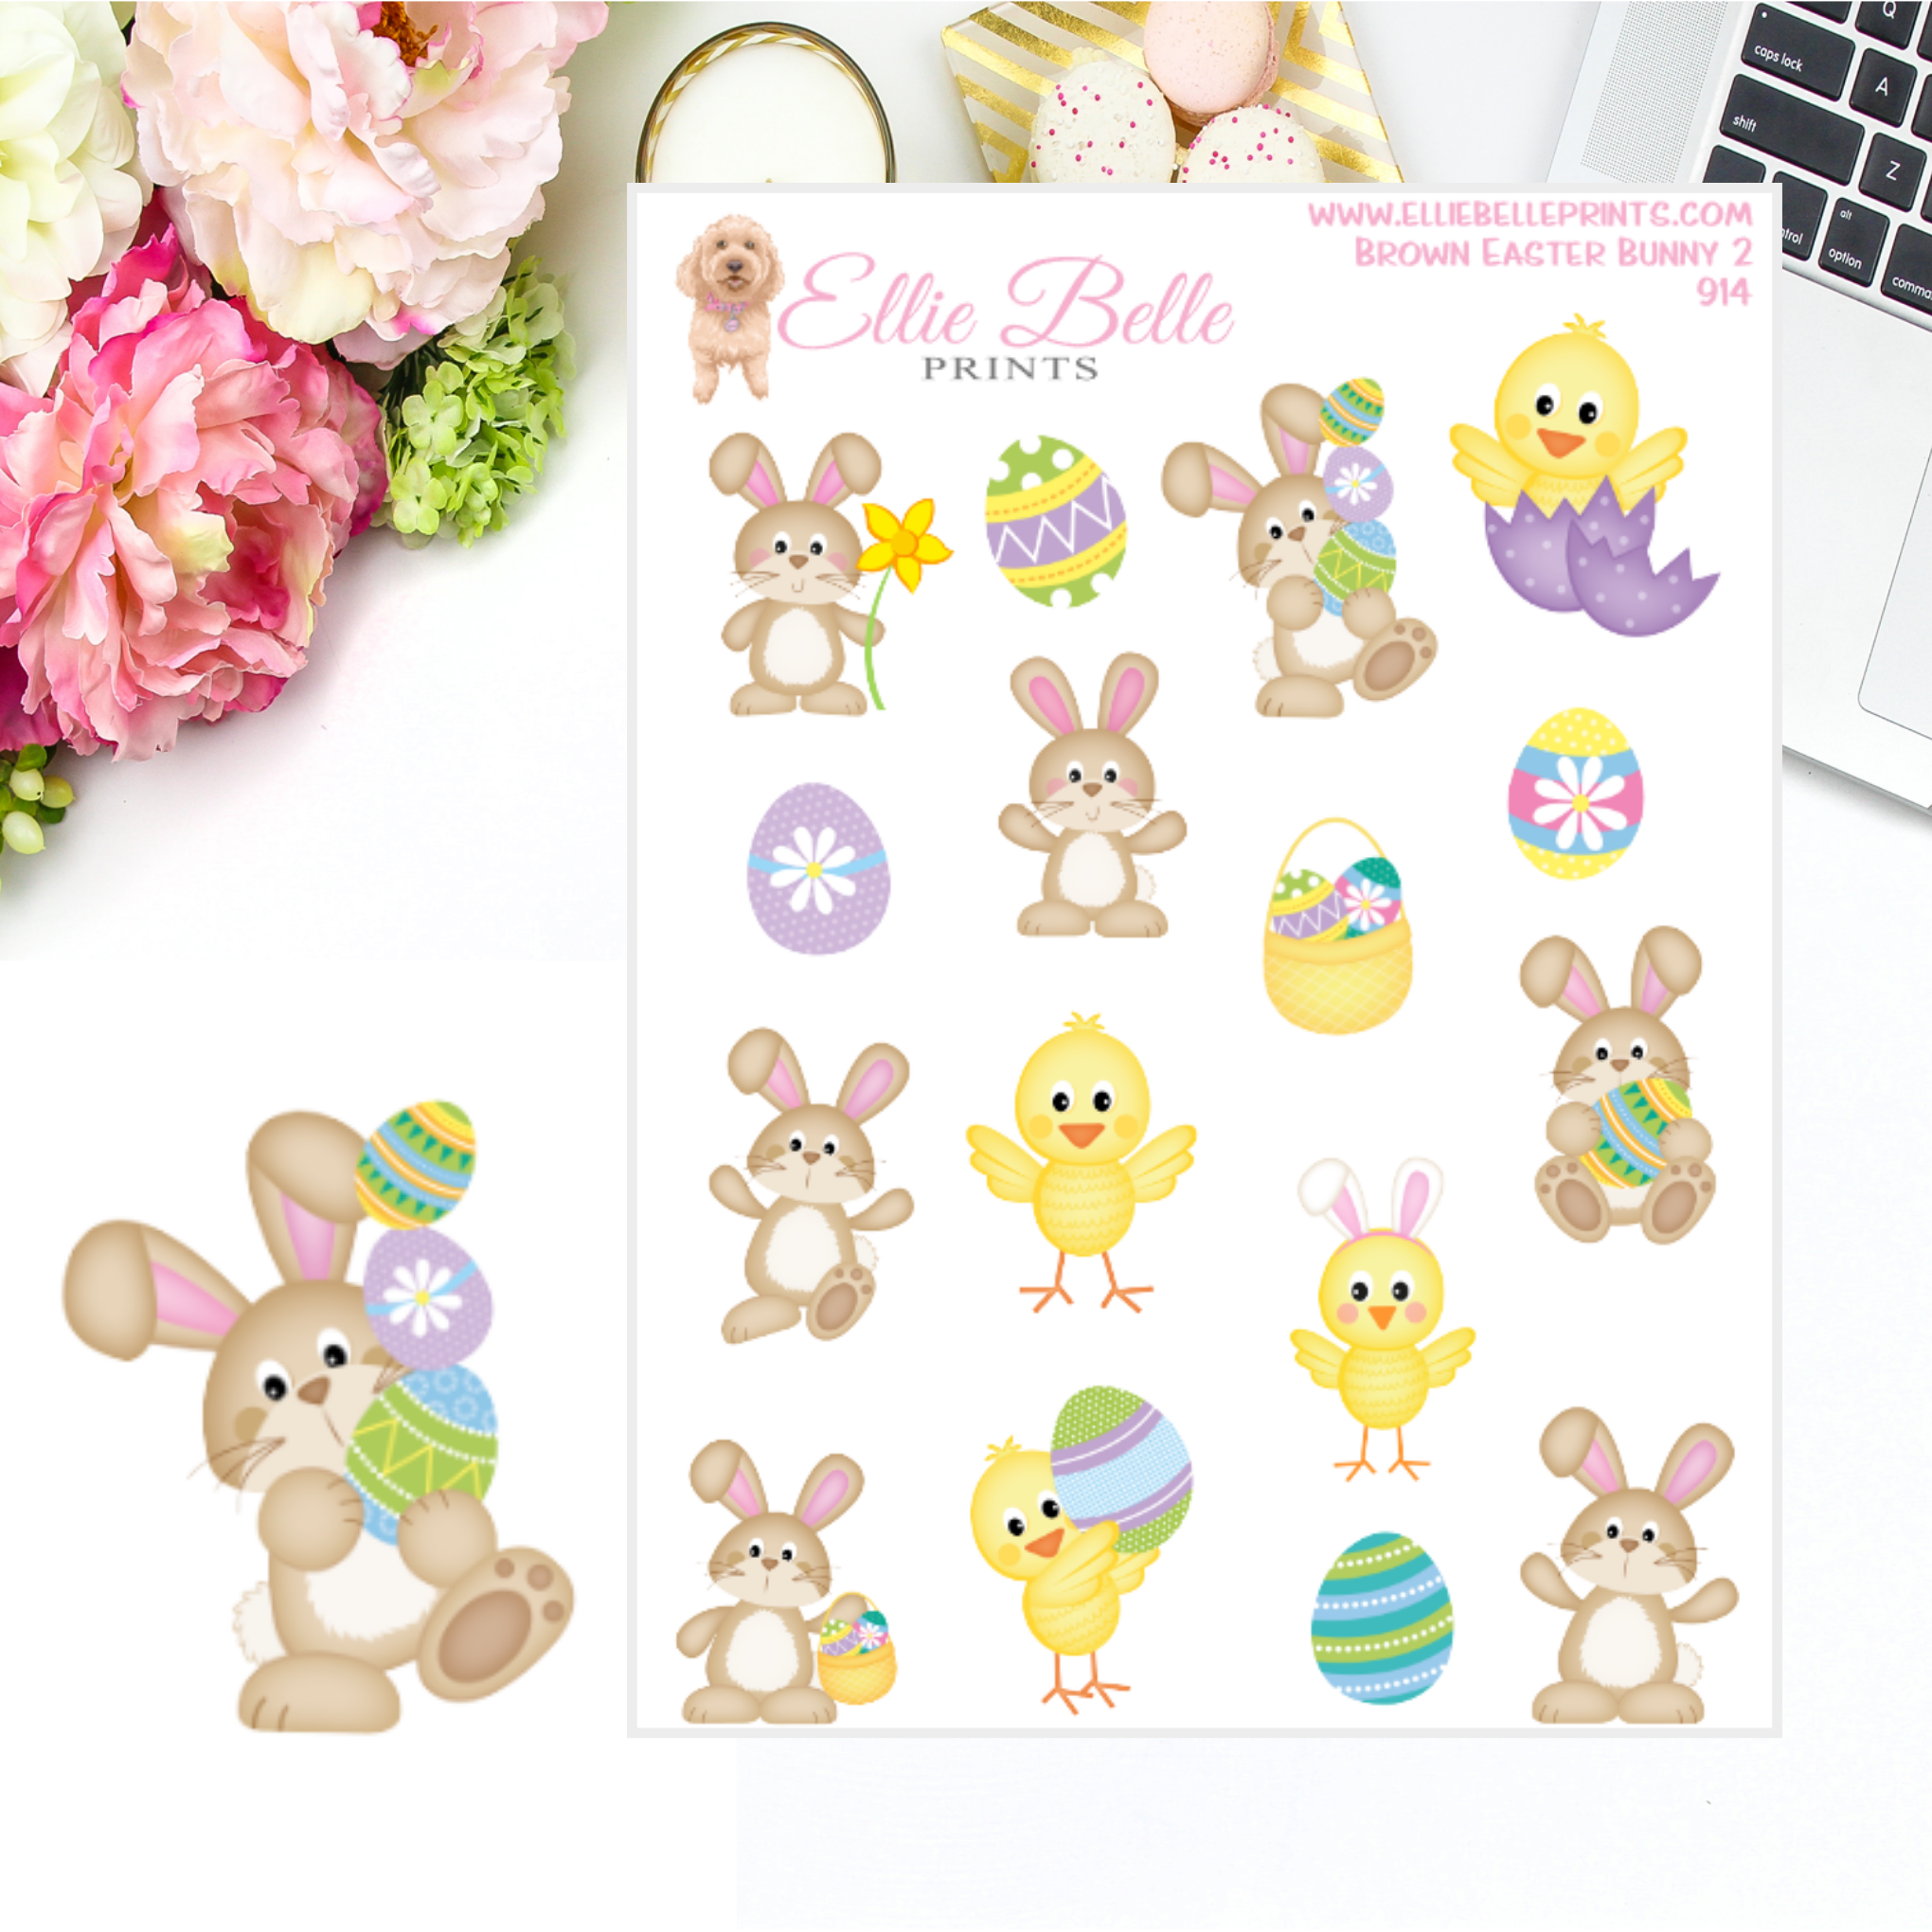 Brown Easter Bunny 2 Stickers